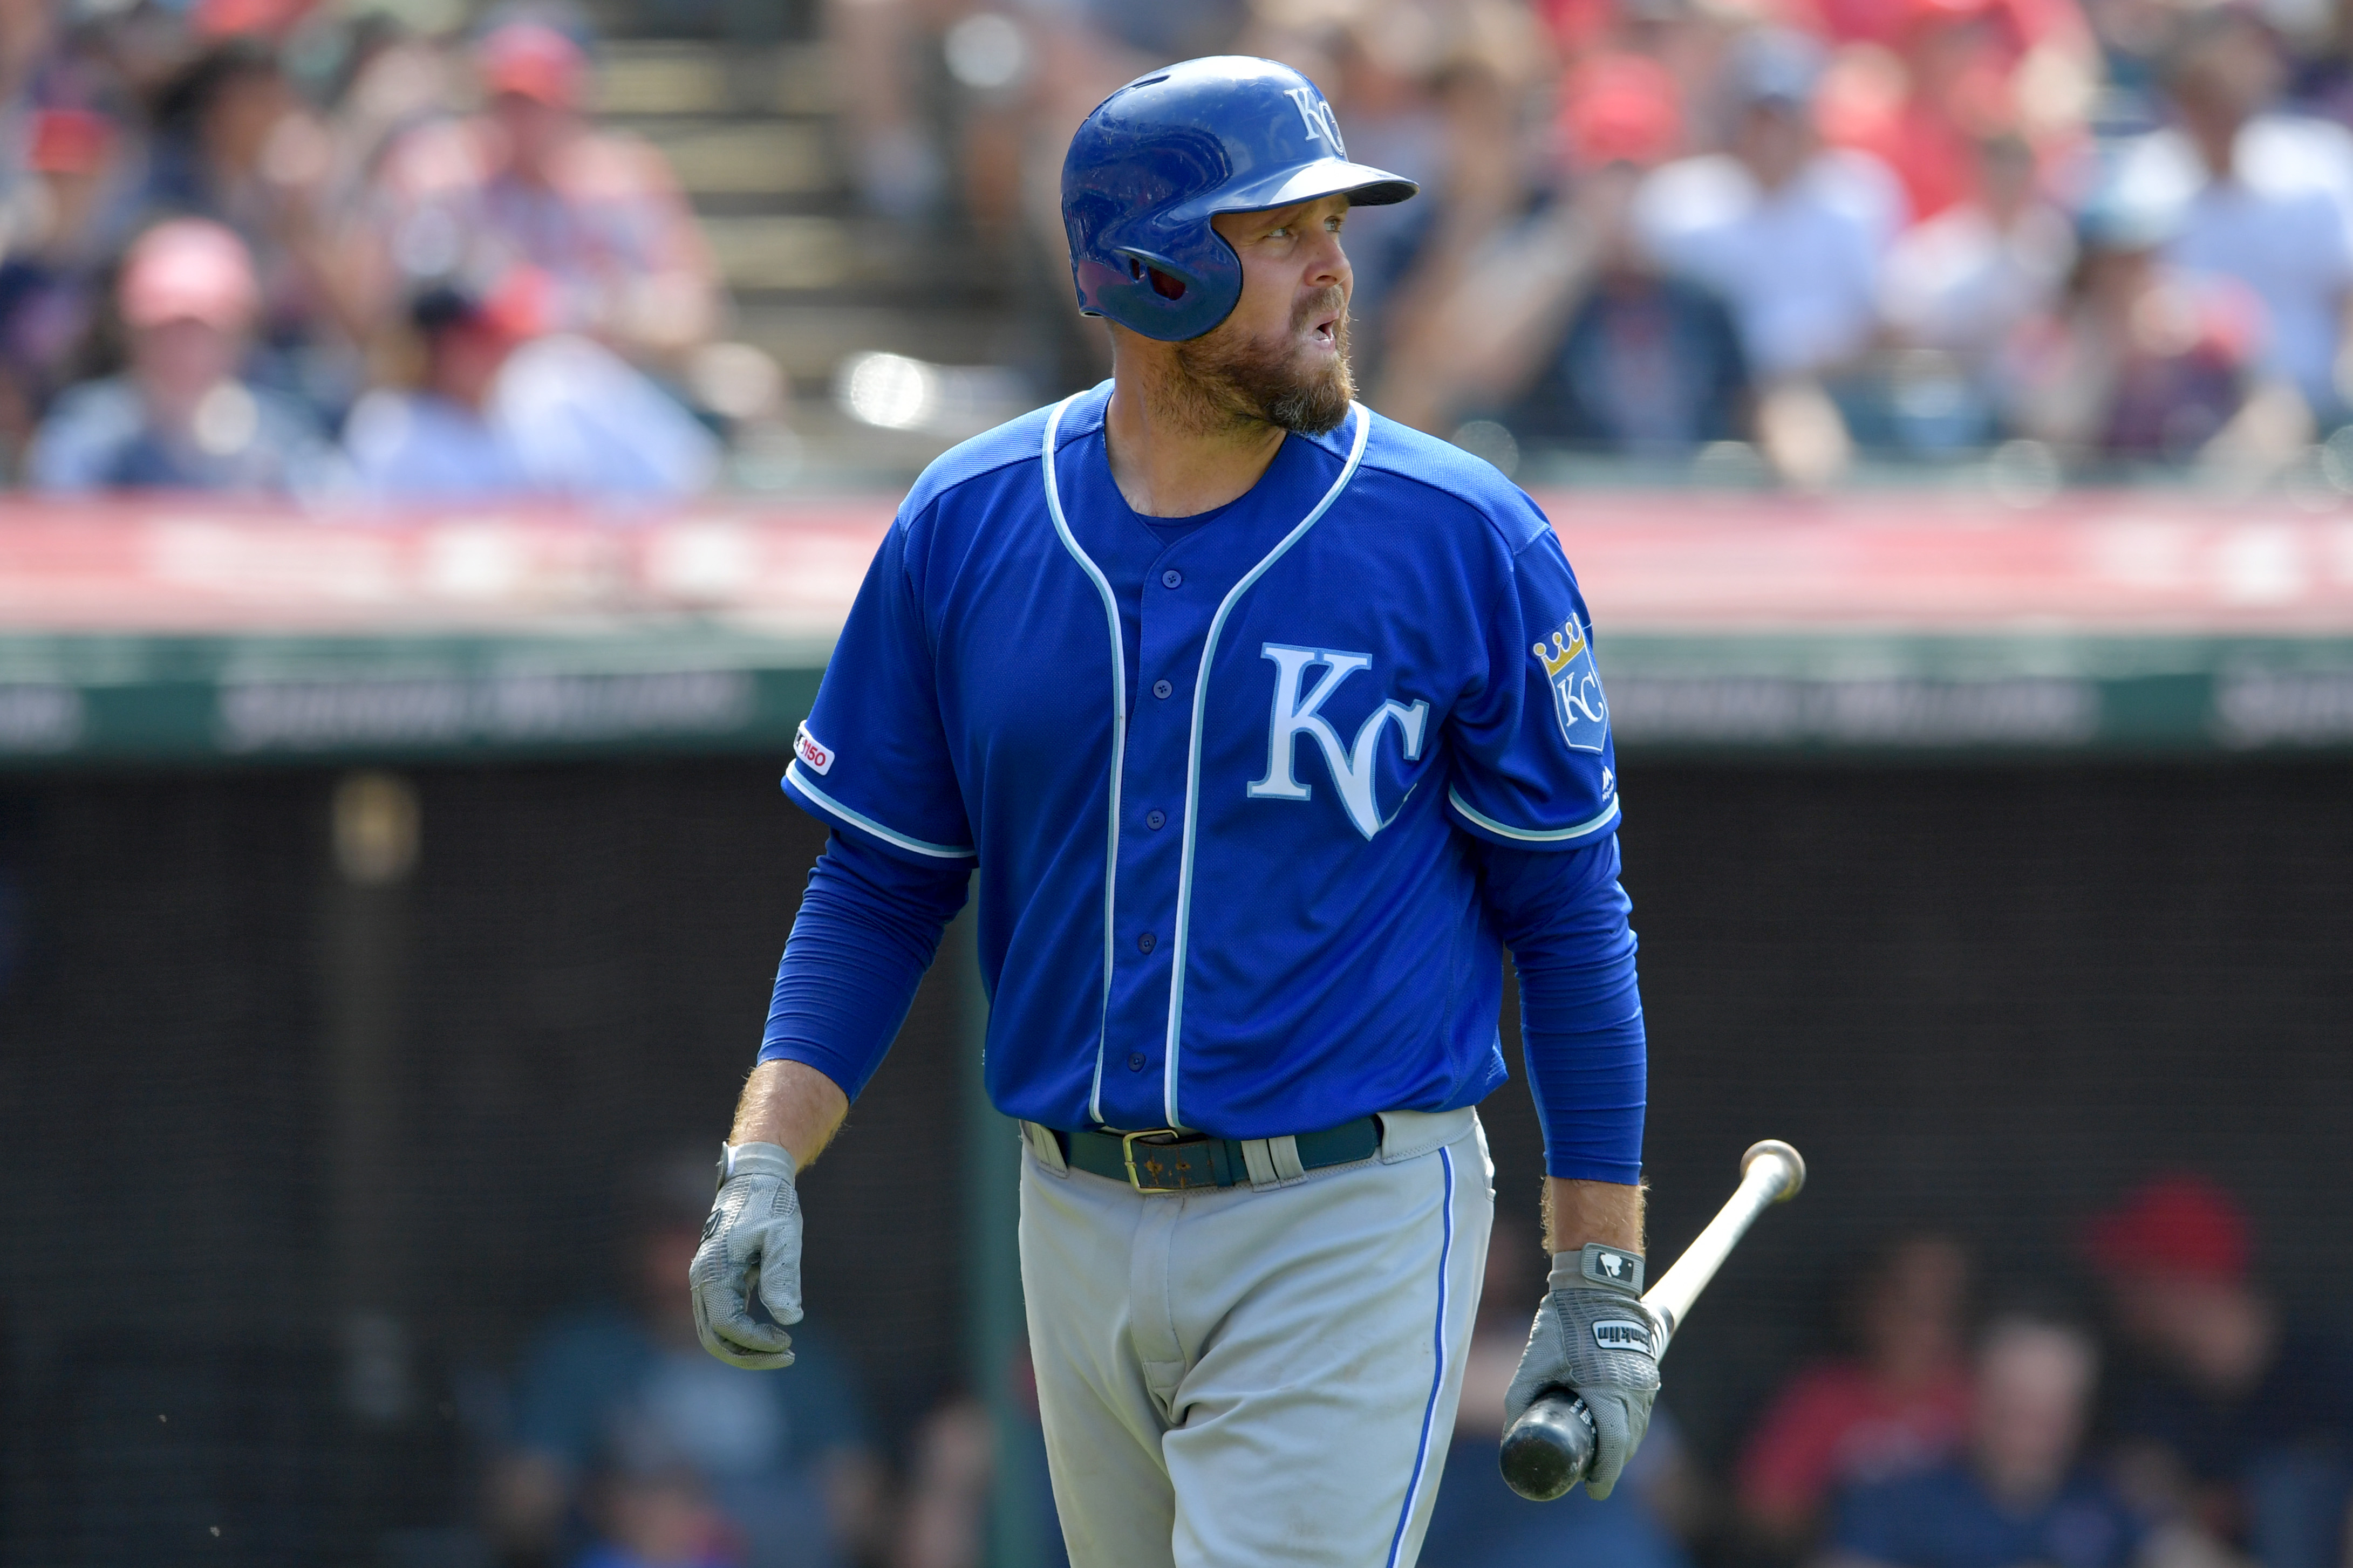 Lucas Duda #52 of the Kansas City Royals reacts after striking out during the ninth inning against the Cleveland Indians at Progressive Field on July 21, 2019 in Cleveland, Ohio. The Indians defeated the Royals 5-4.